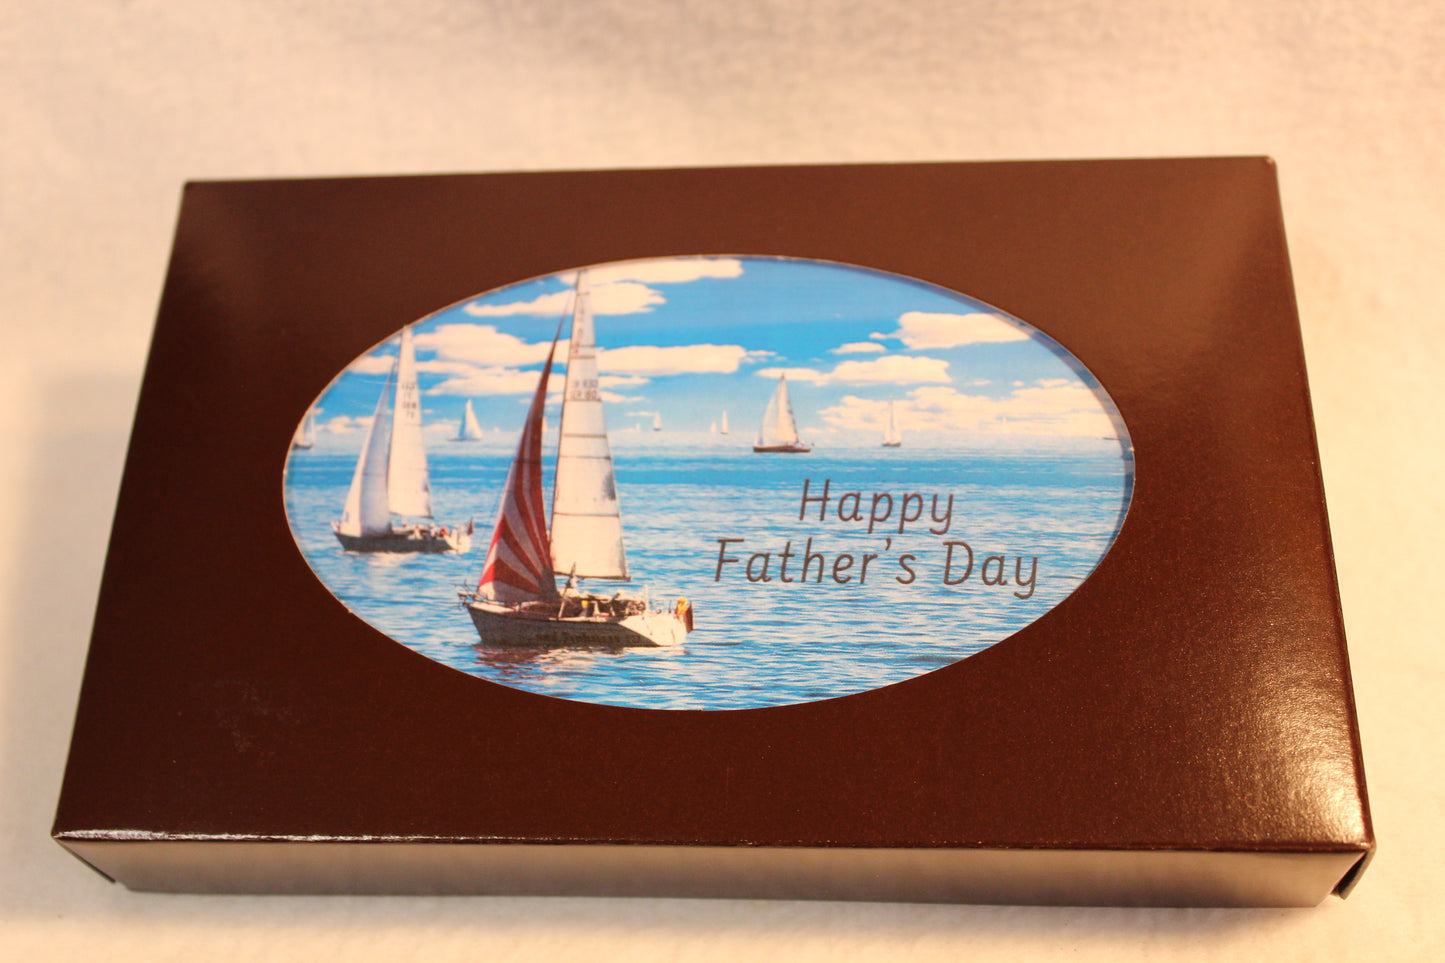 Happy Father's Day - Sailboat - Card & Box of Candy